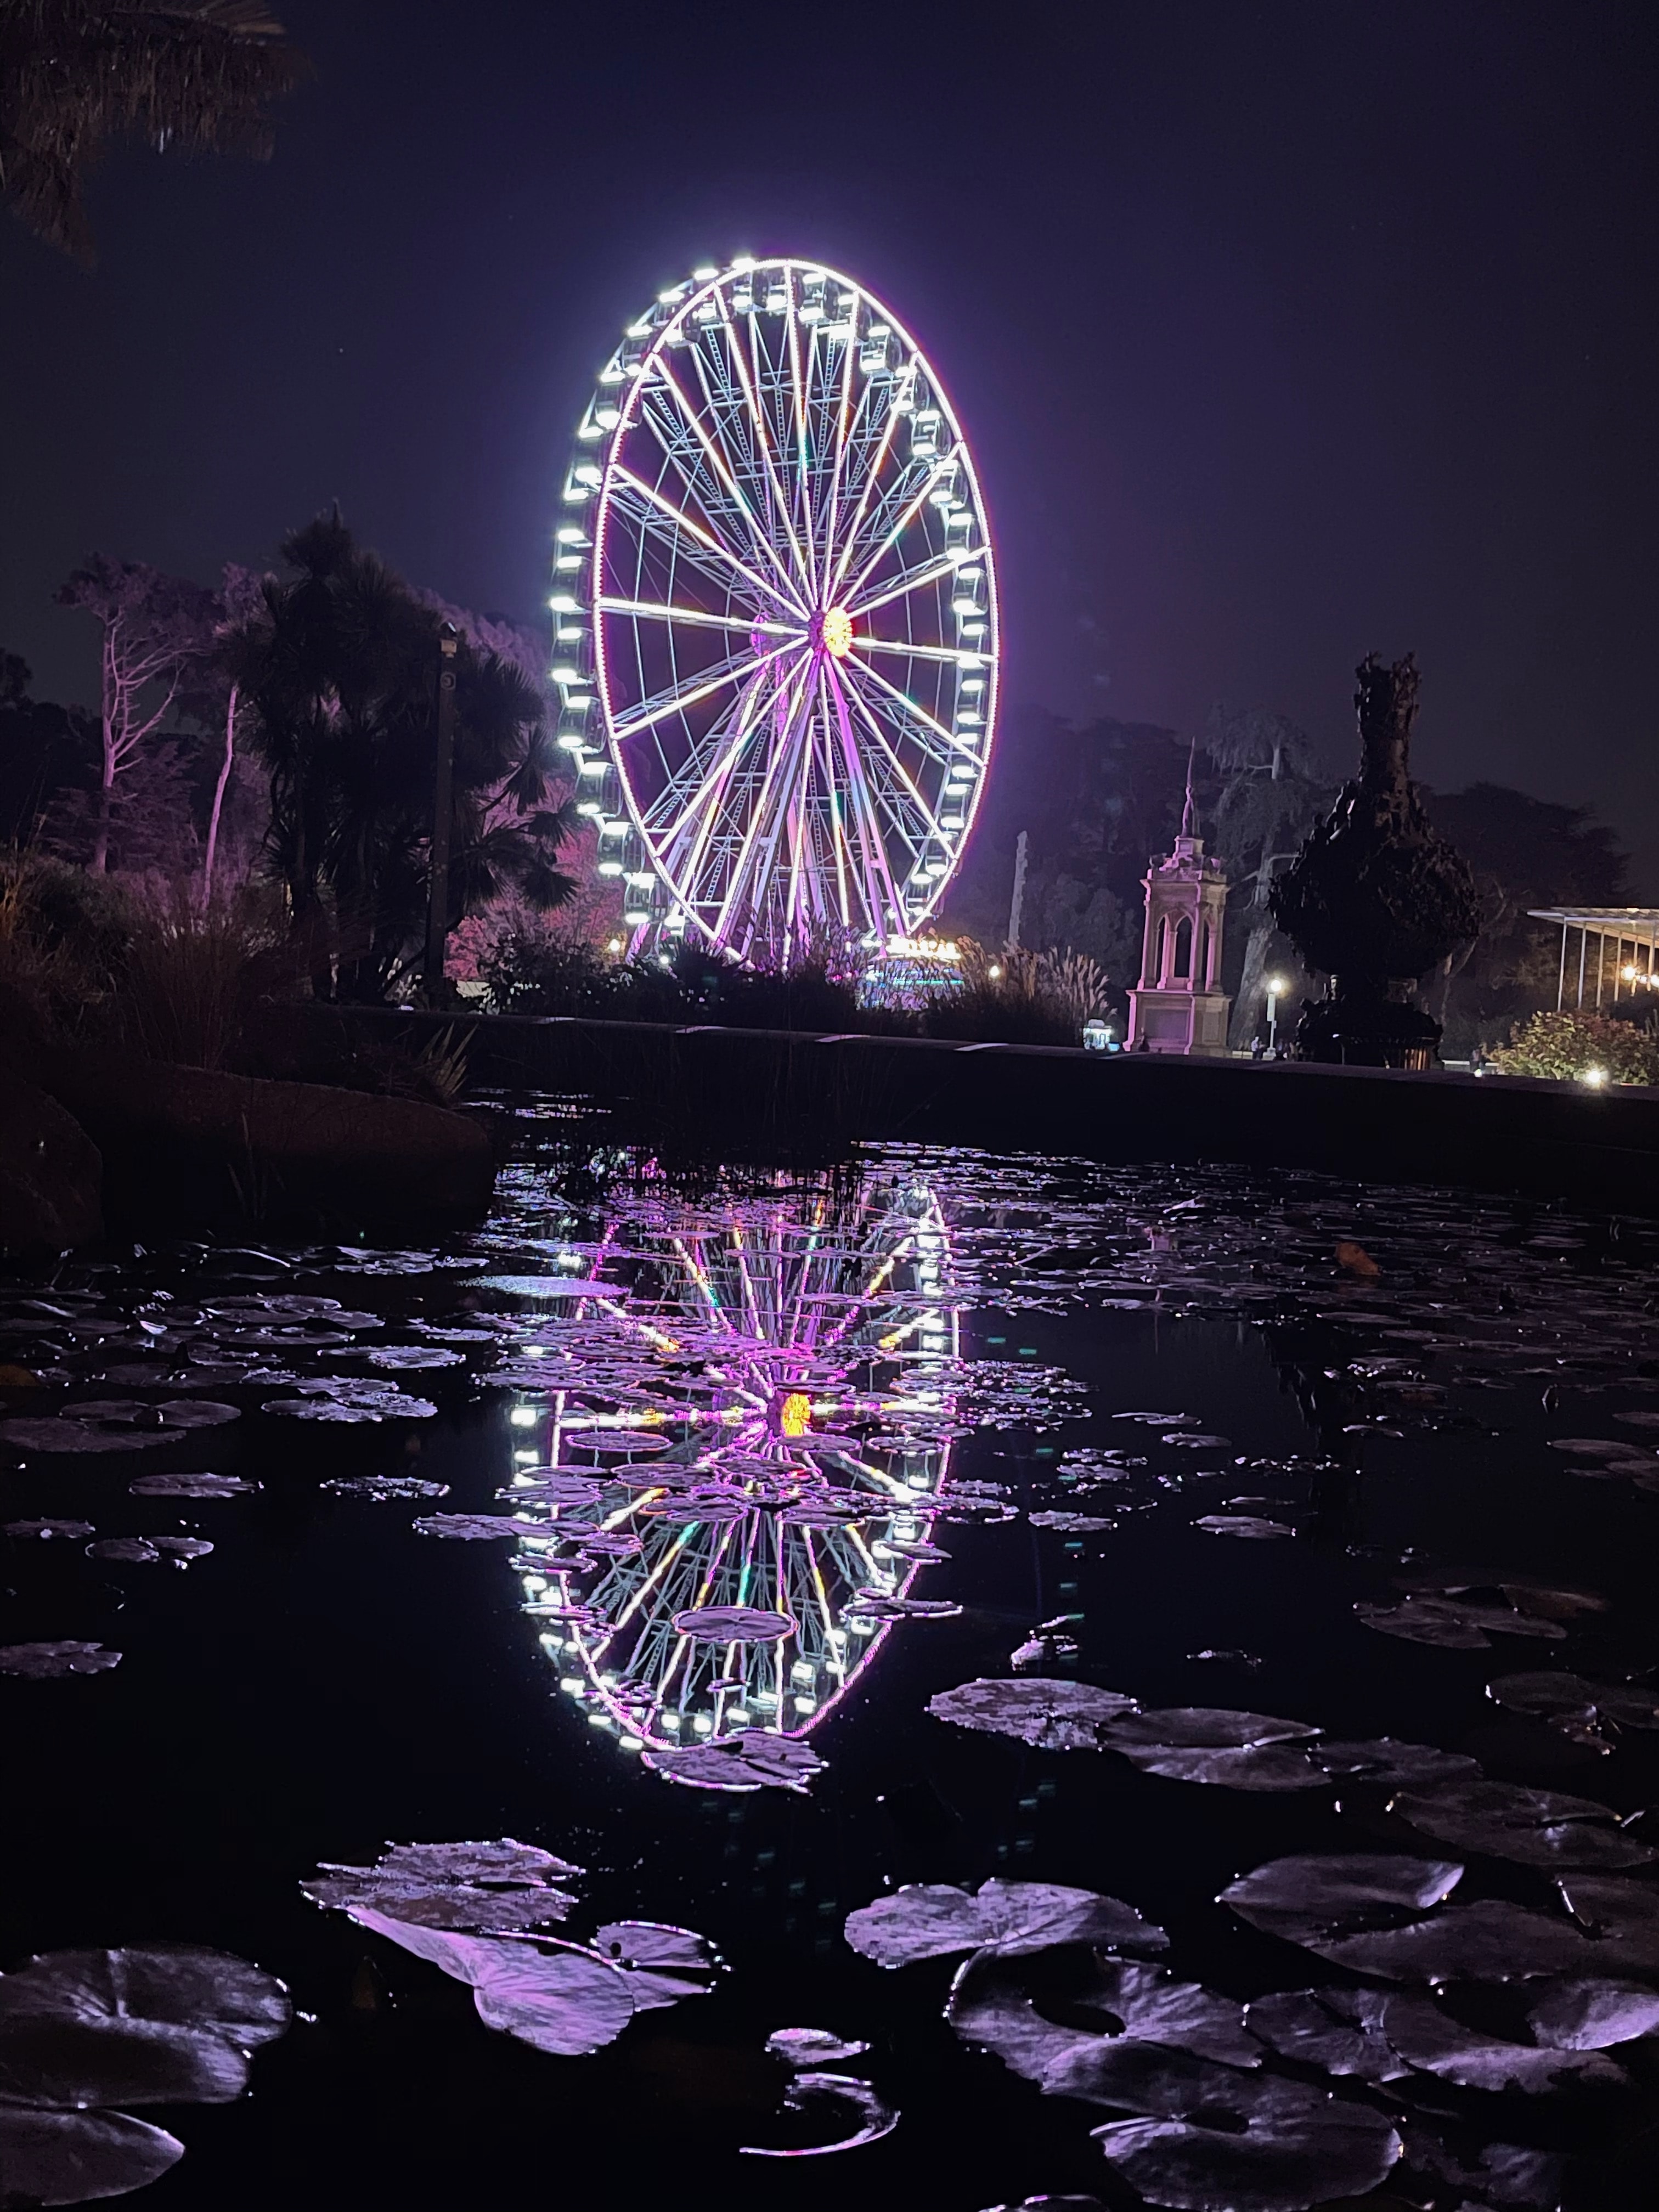 Not bad for a nighttime shot. San Francisco's SkyStar Wheel is a little blurred because the wheel was moving, and the lights themselves were constantly changing and pulsating.